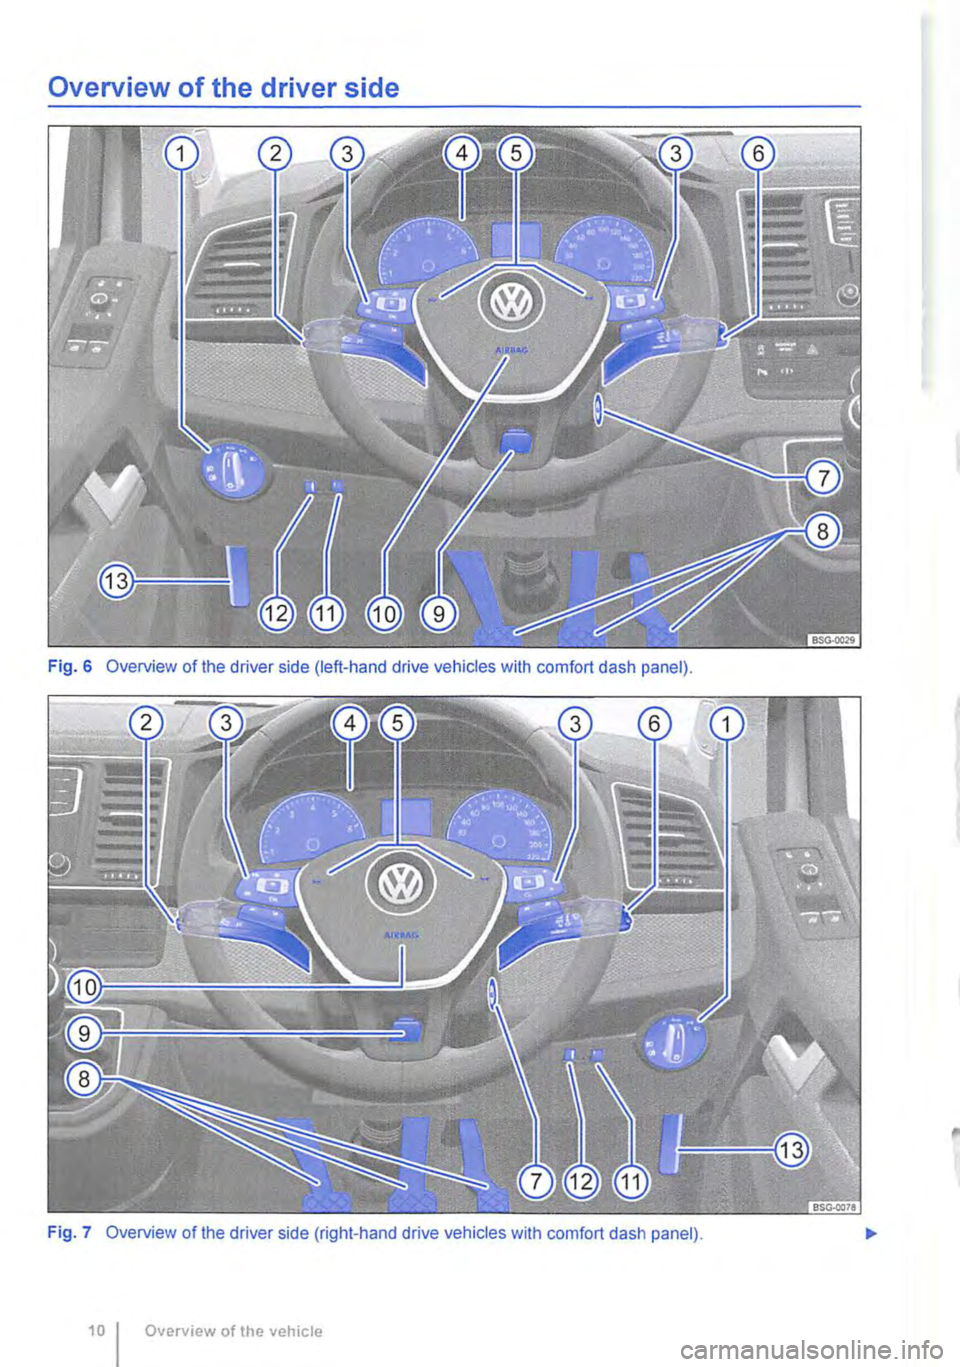 VOLKSWAGEN TRANSPORTER 2013  Owners Manual Overview of the driver side 
Fig. 6 Overview of the driver side (left-hand drive vehicles with comfort dash panel). 
Fig. 7 Overview of the driver side (right-hand drive vehicles with comfort dash pan